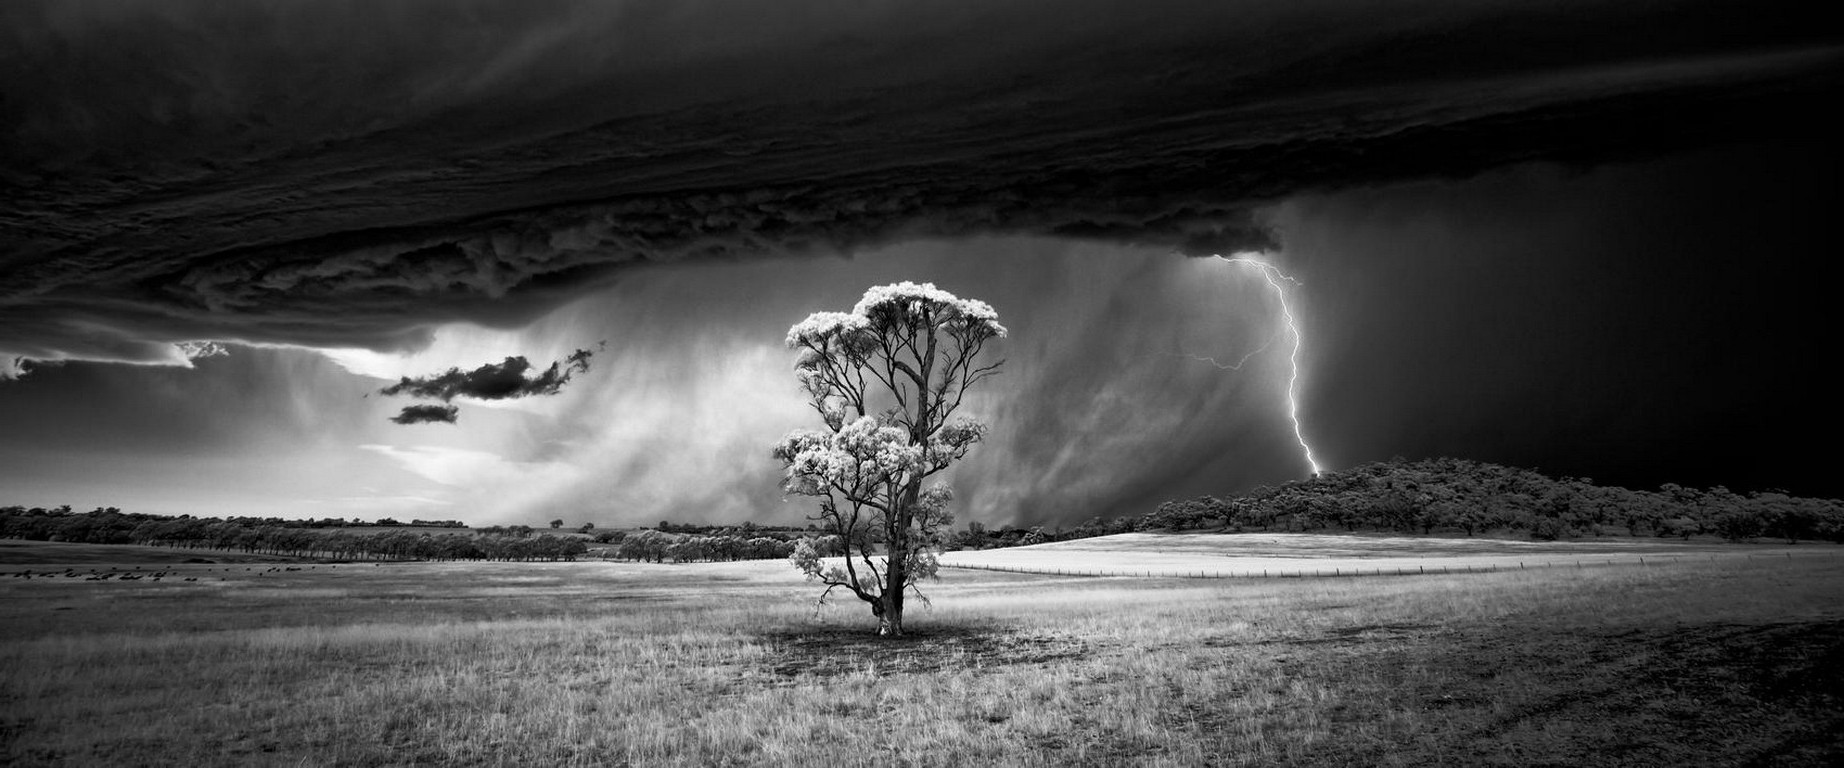 nature, Landscape, Trees, Field, Storm, Lightning, Supercell (nature), Clouds, Hill, Wind, Monochrome, Panoramas Wallpaper